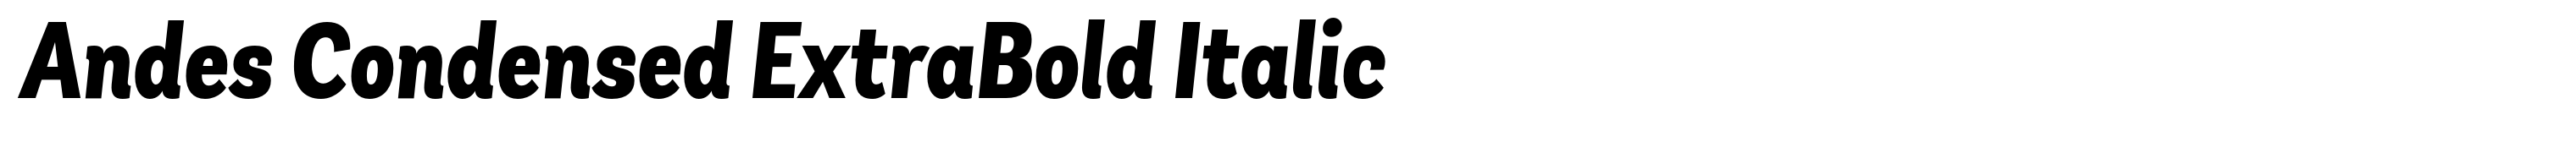 Andes Condensed ExtraBold Italic